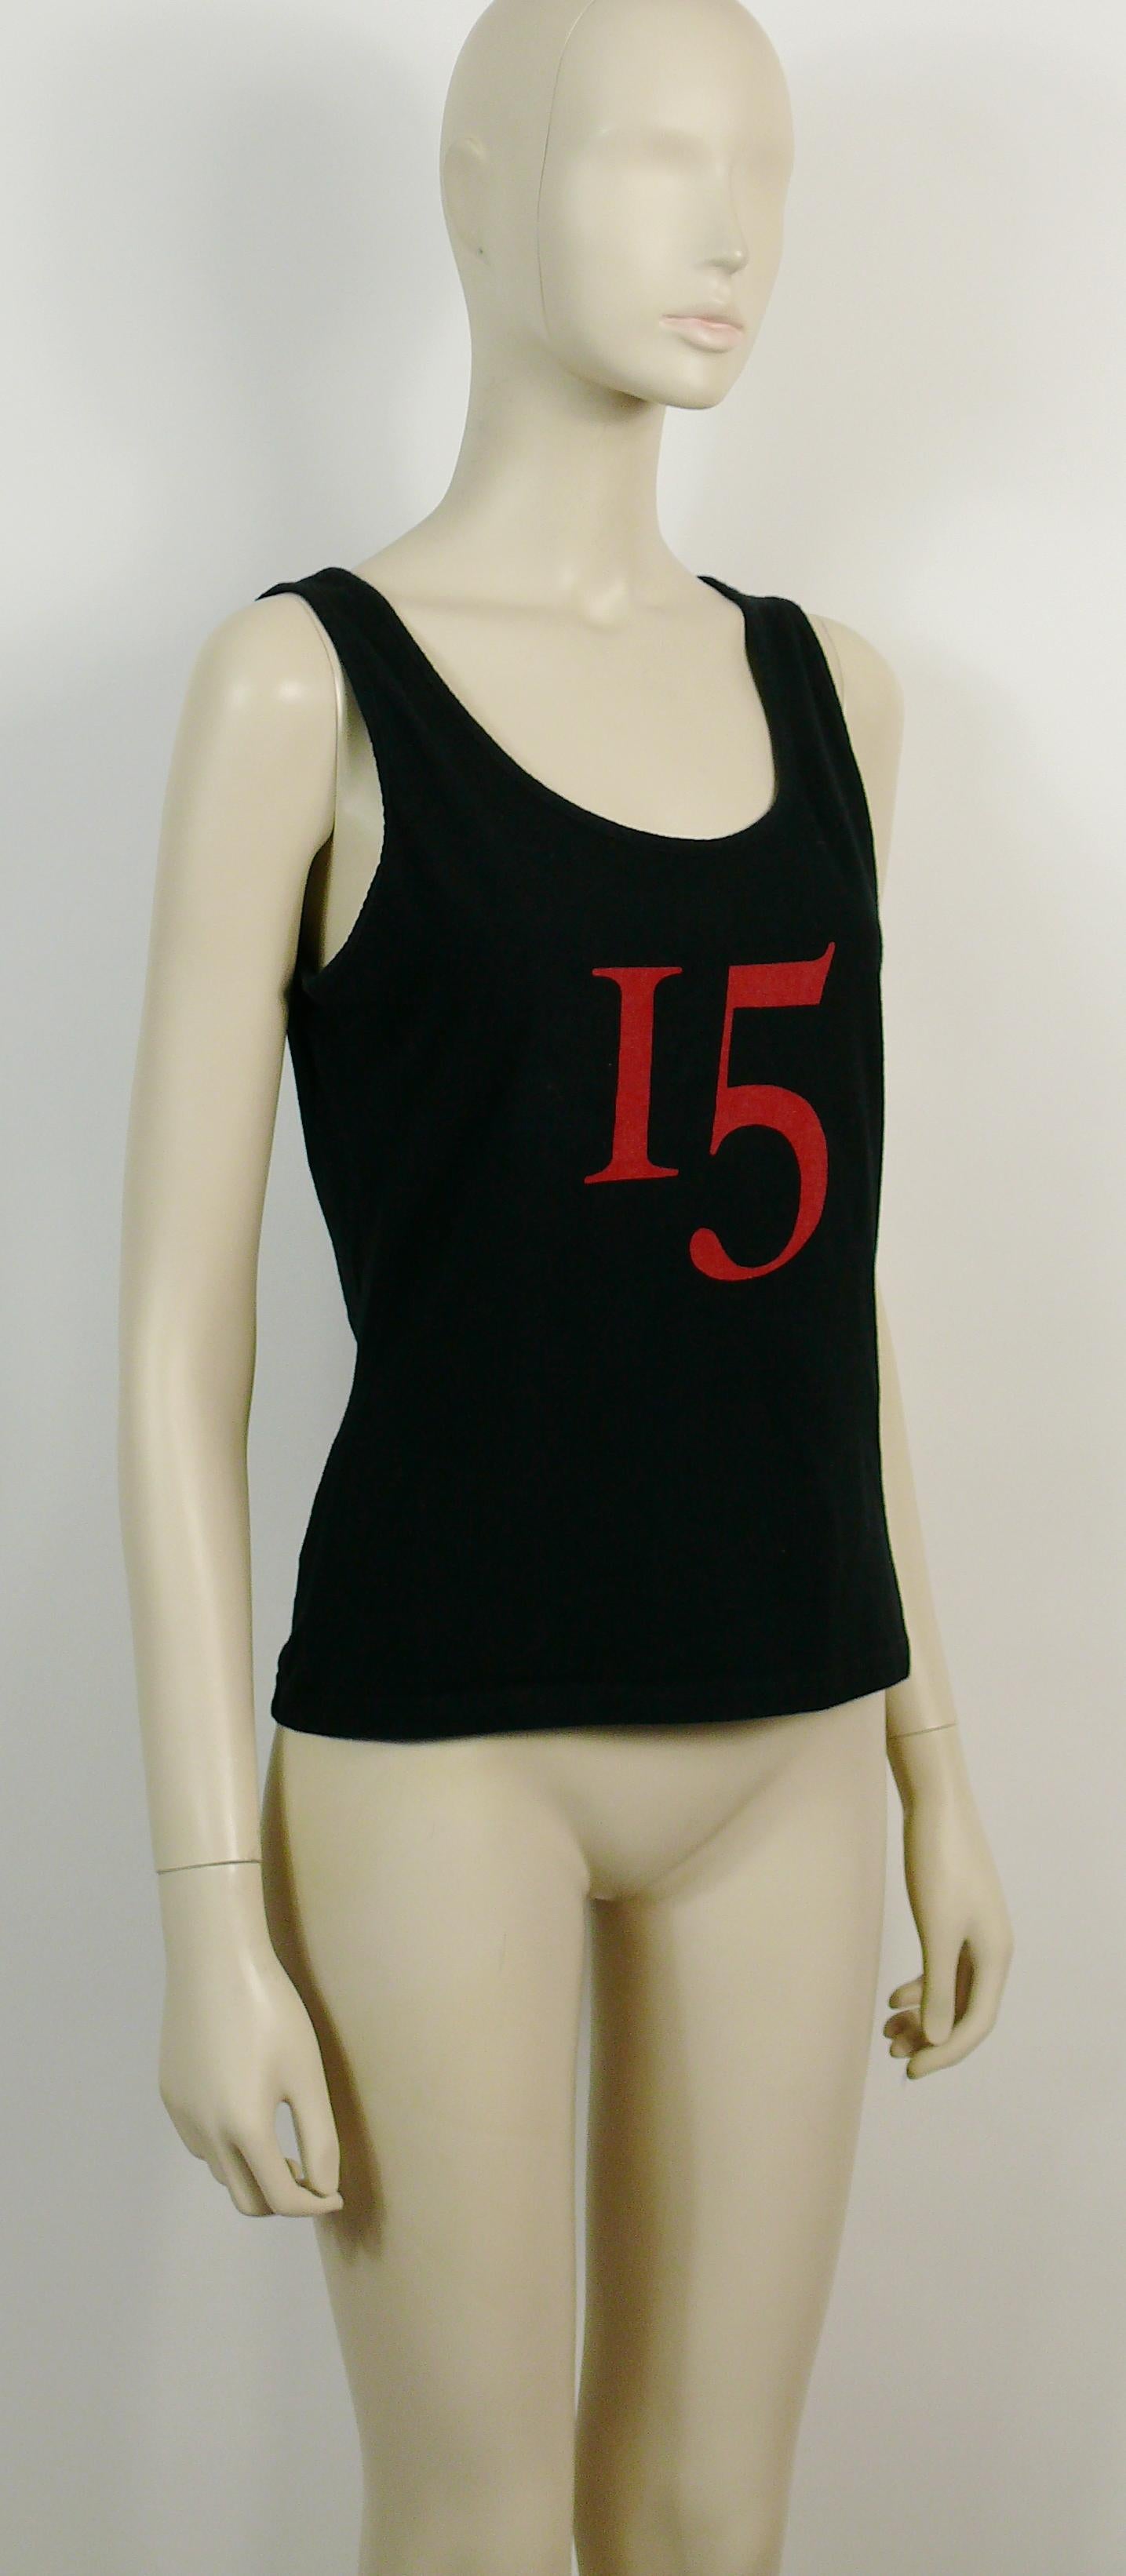 CHRISTIAN LACROIX vintage black tank top featuring an iconic large jewelled cross print on the back and a red 